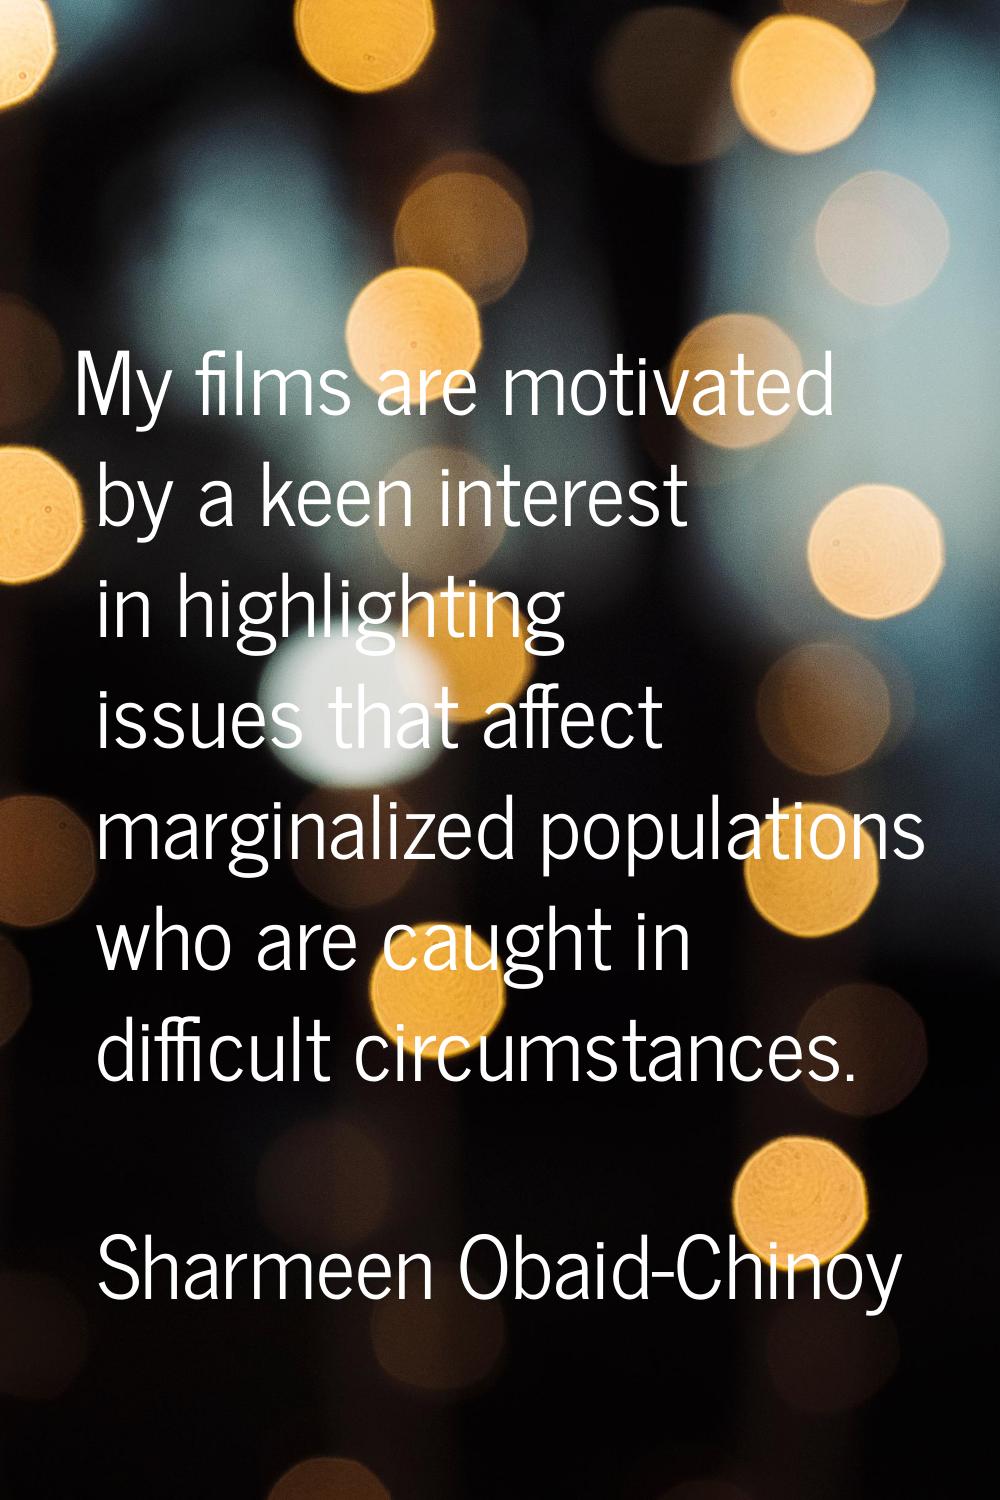 My films are motivated by a keen interest in highlighting issues that affect marginalized populatio